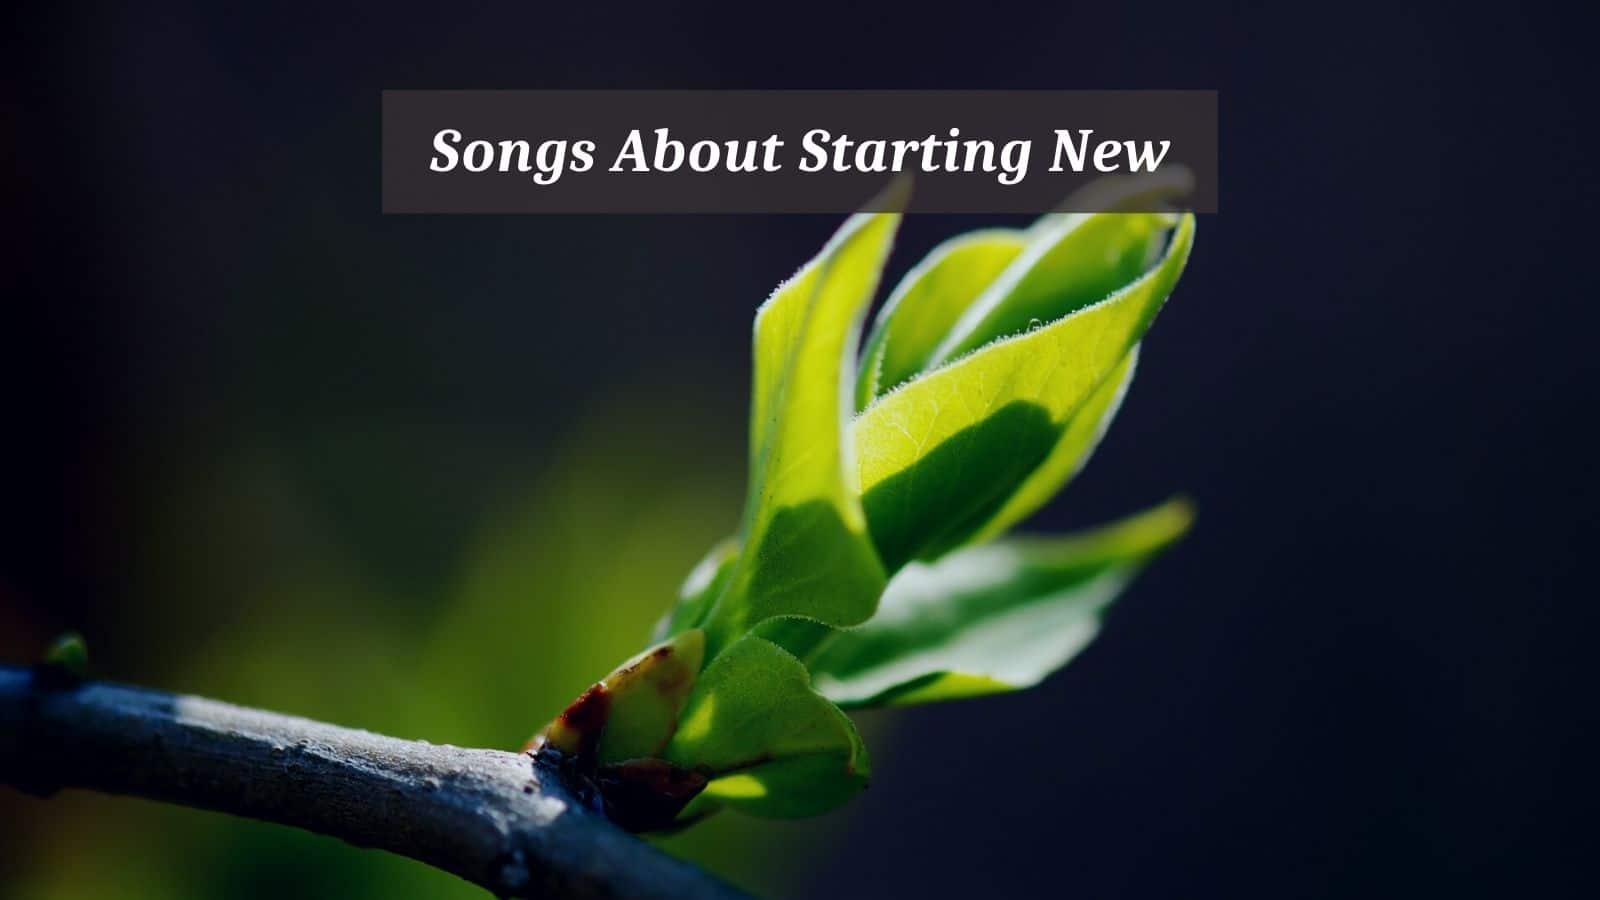 Songs About Starting New